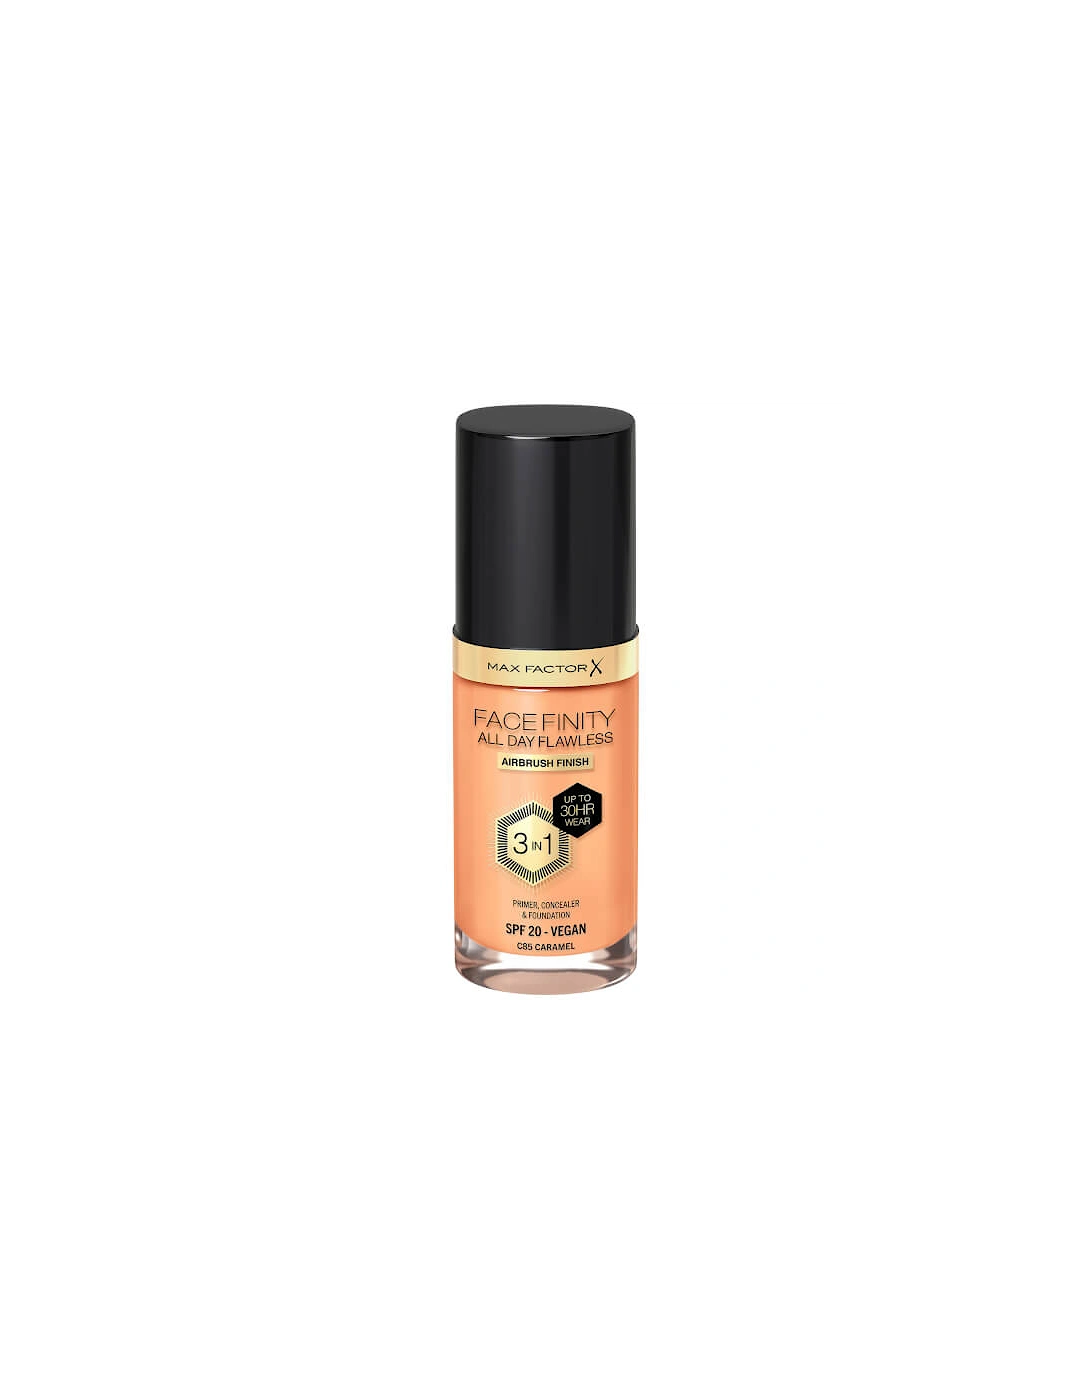 Facefinity All Day Flawless 3 in 1 Vegan Foundation - C85 Caramel, 2 of 1